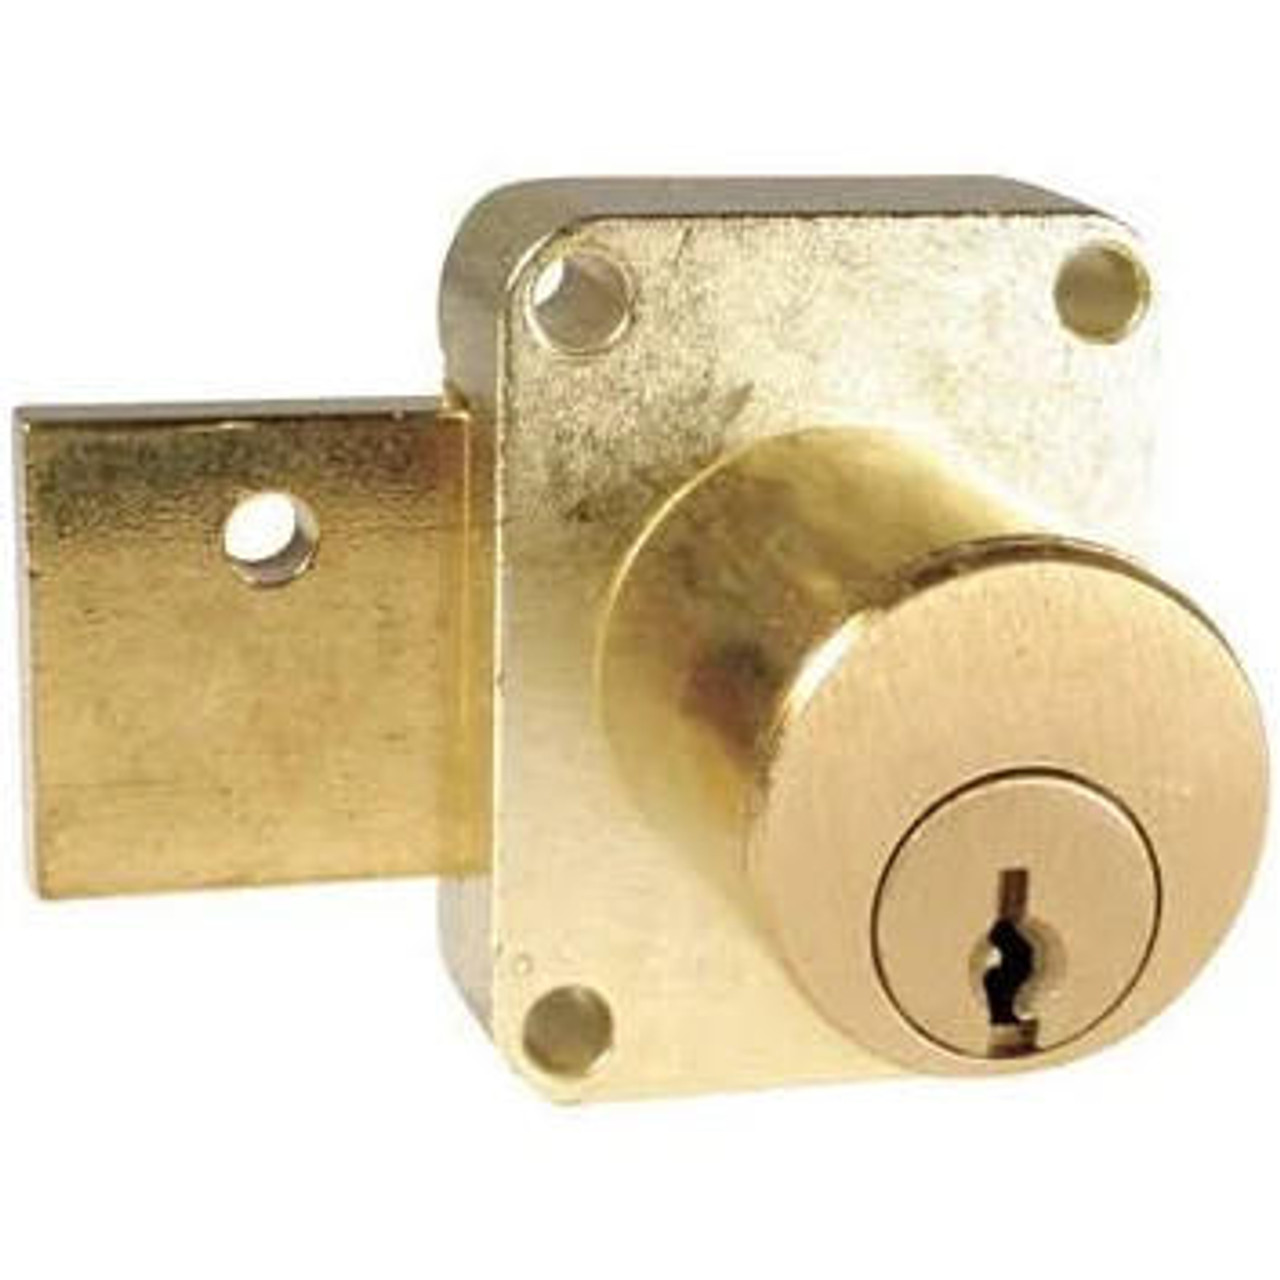 Compx Security Products Compx pin tumbler door lock, 7/8" cylinder length C8173 